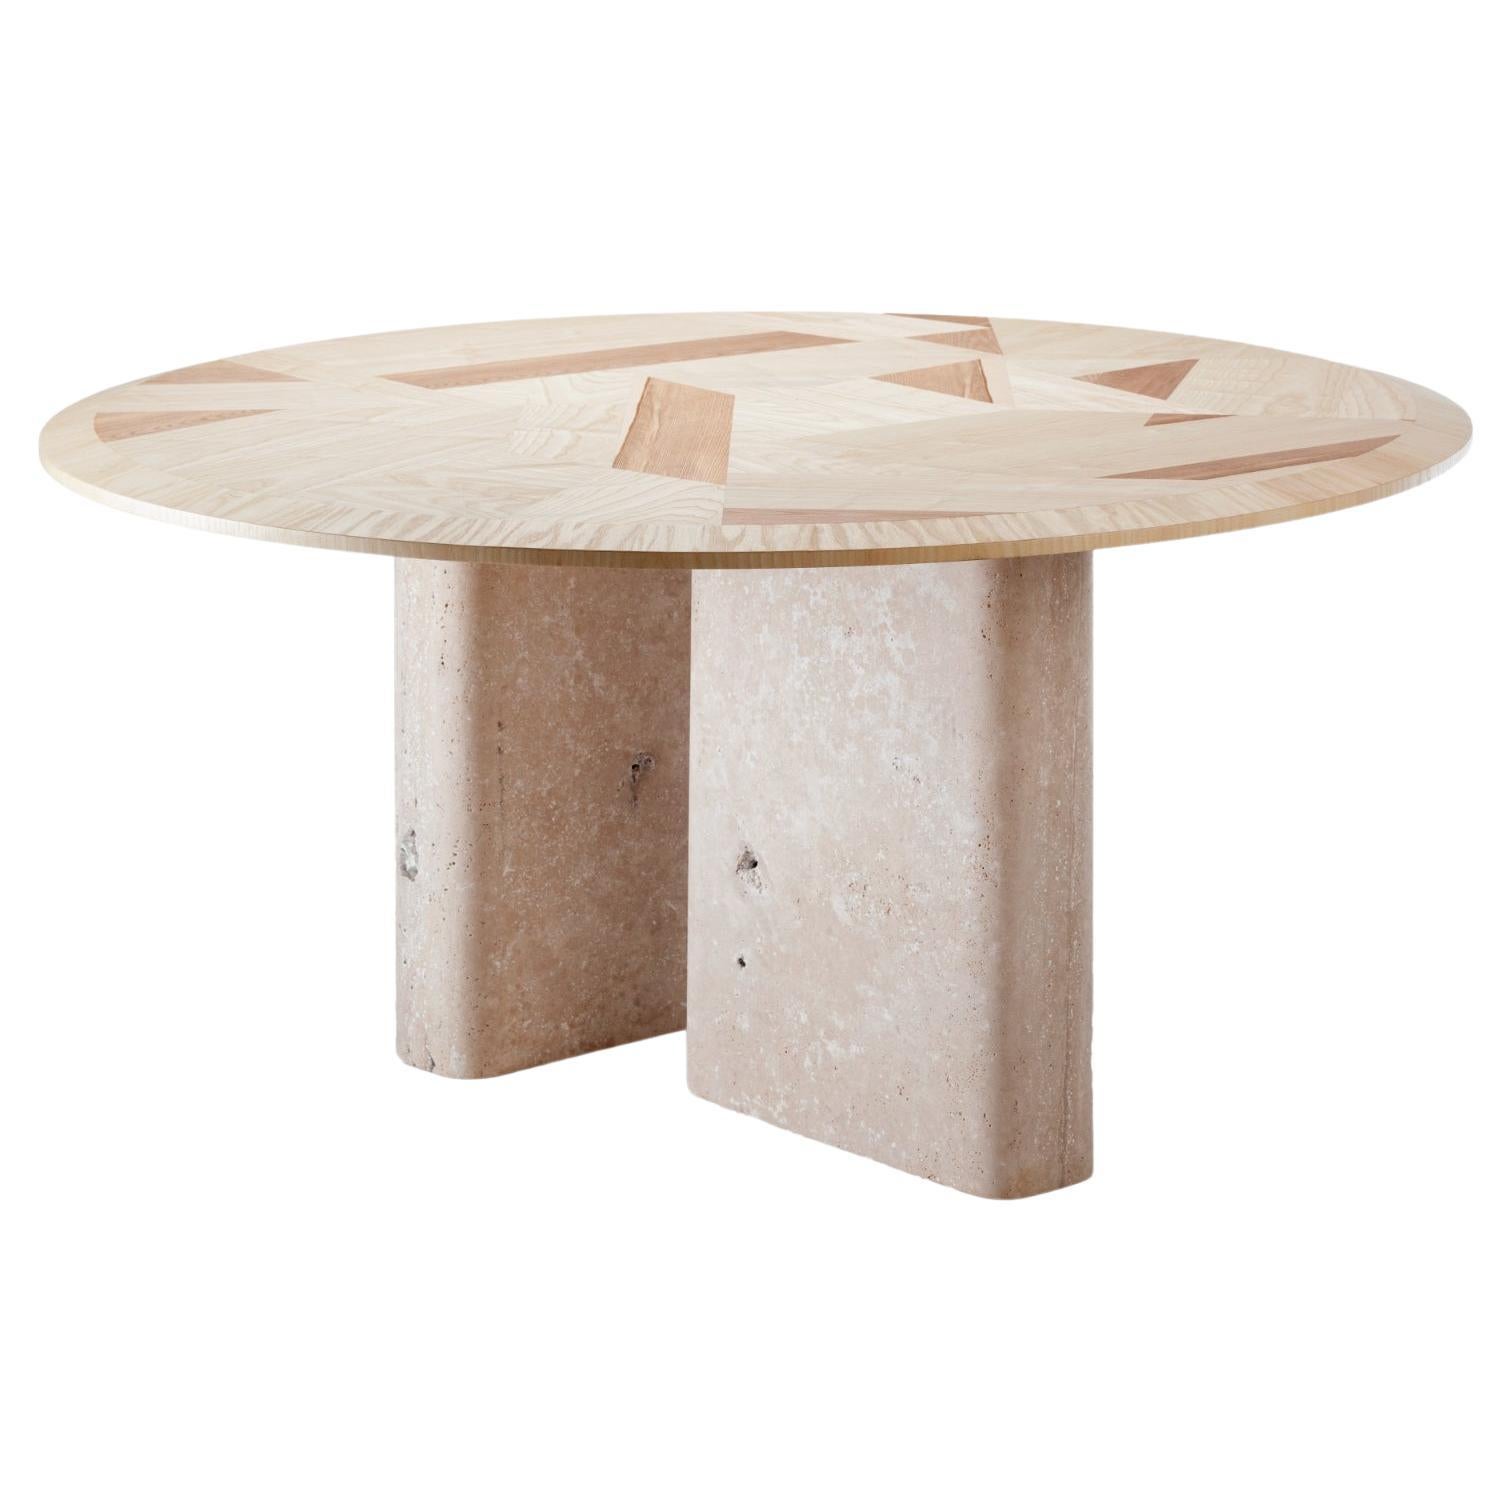 L’anamour Dinner Table by Dooq For Sale